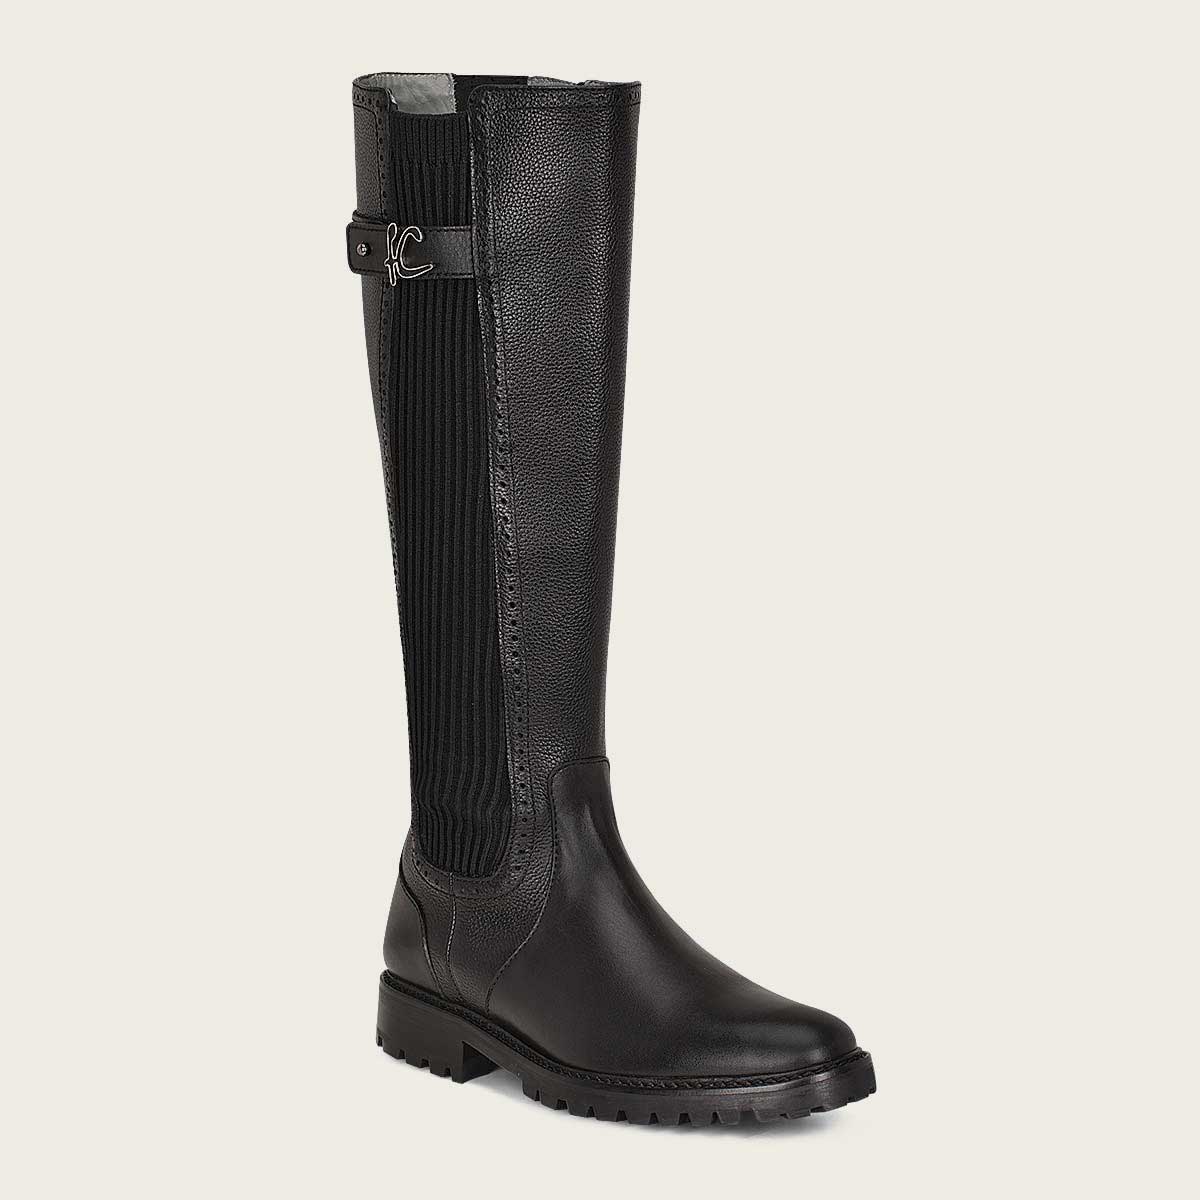 black bovine leather high boot, for women in bovine leather. It presents details with contrasting textures, brocade details, a metallic application.